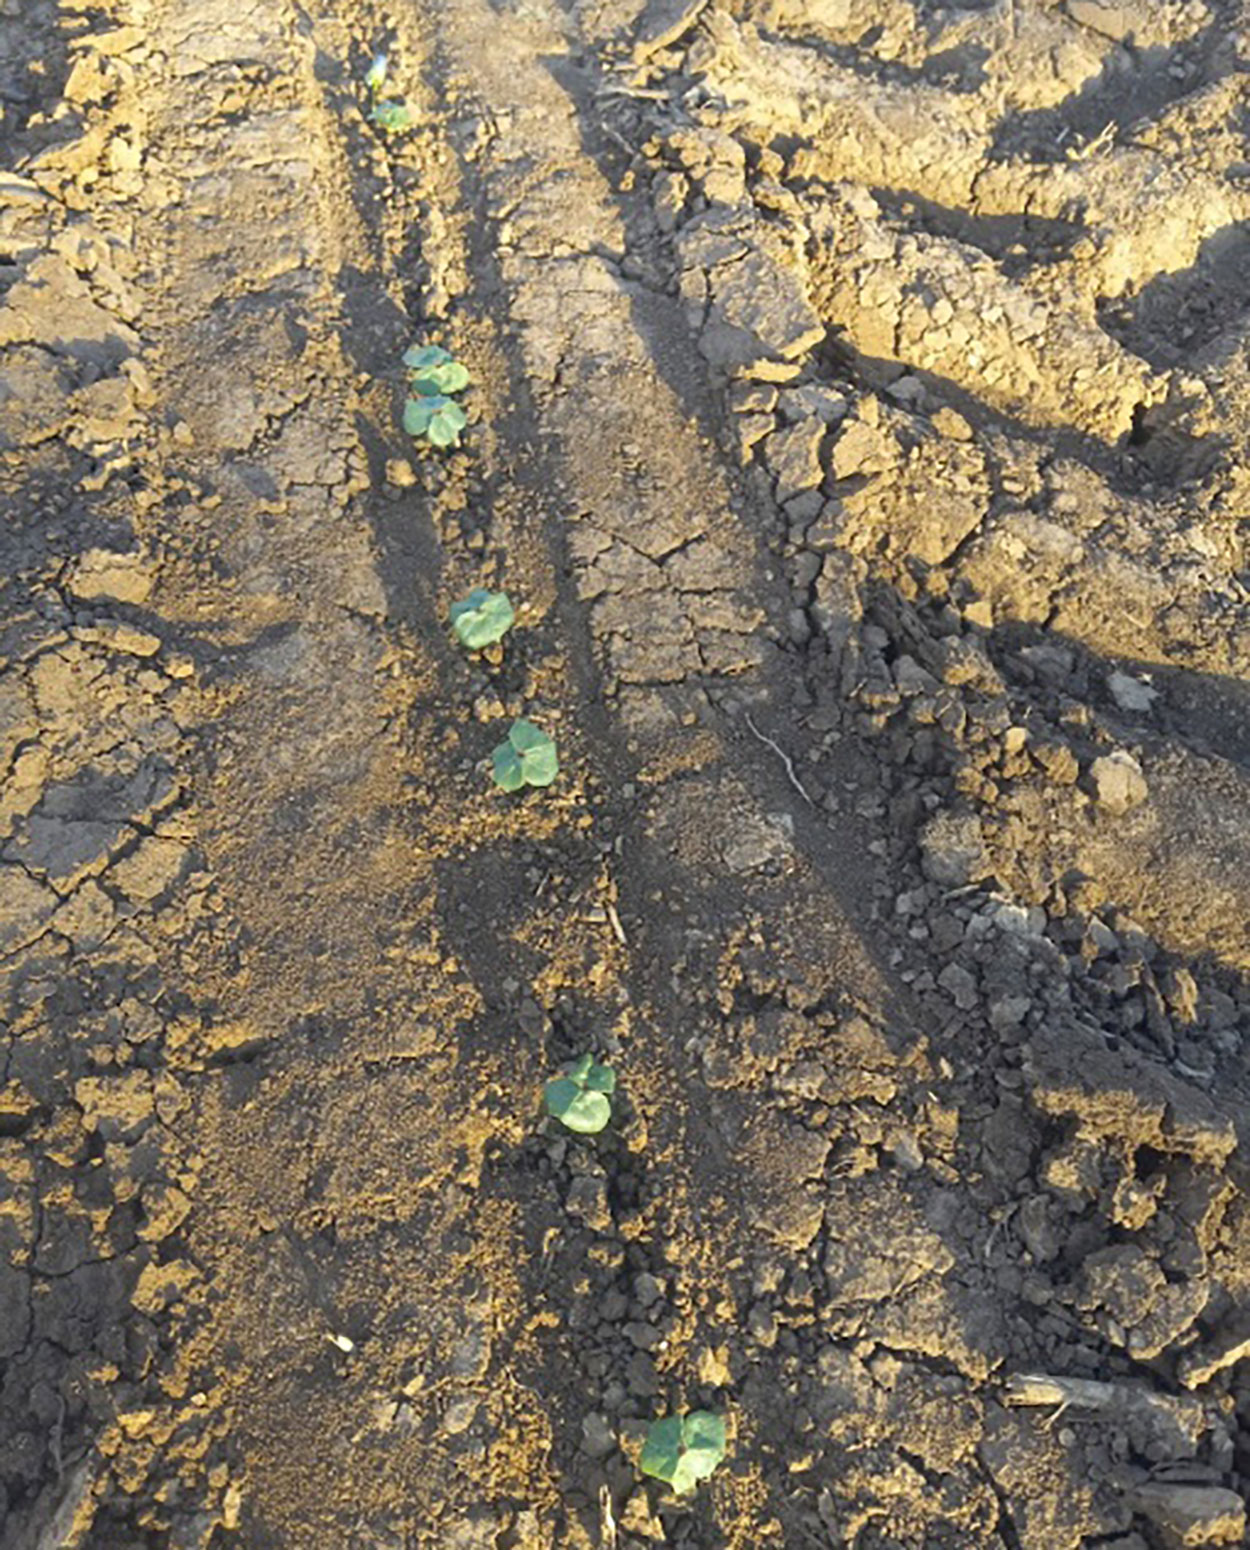 Row of young crops emerging from a tire rut in compacted soil.